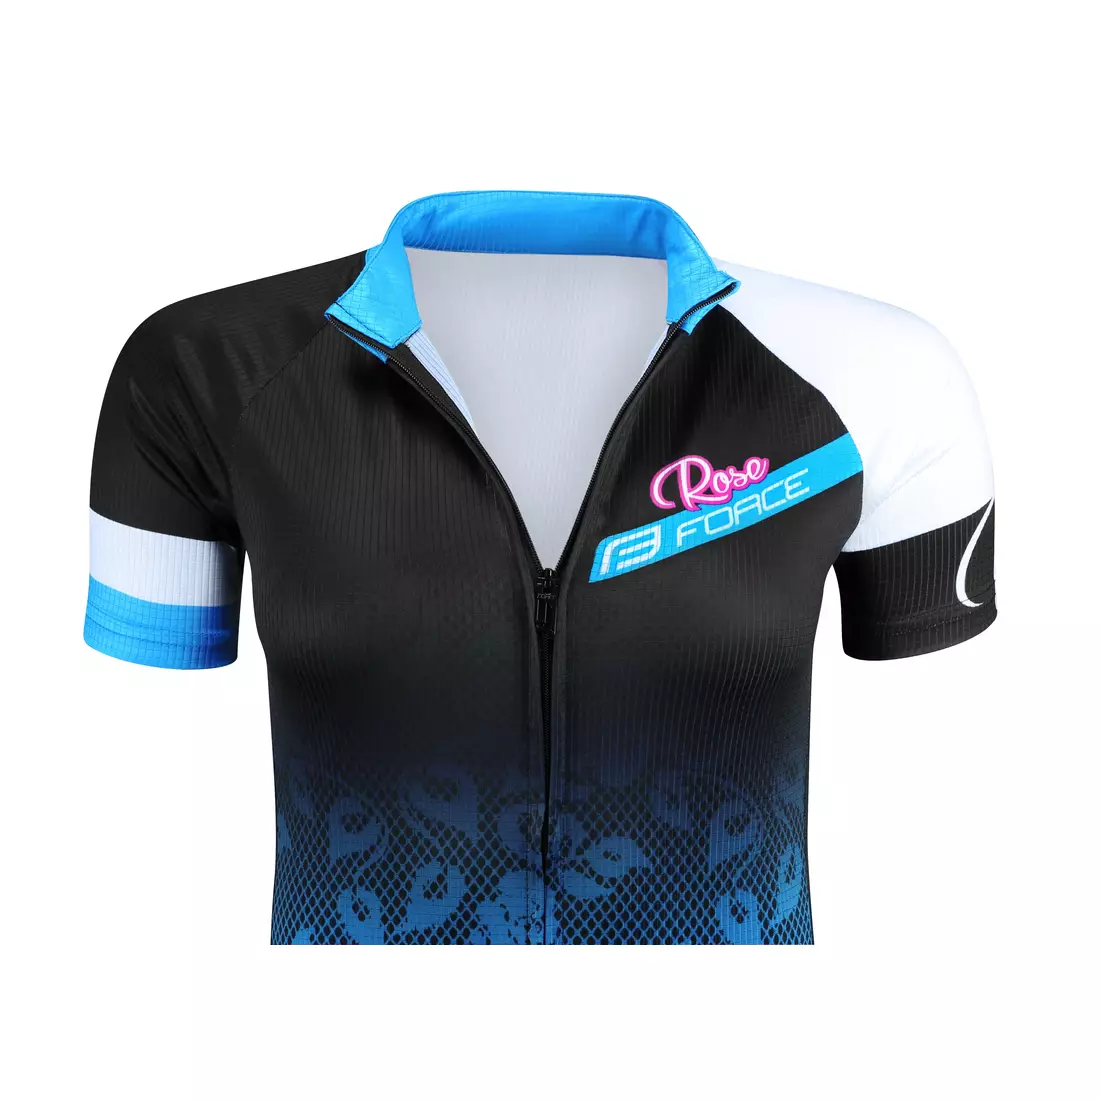 FORCE ROSE women's cycling jersey 9001341 black and blue